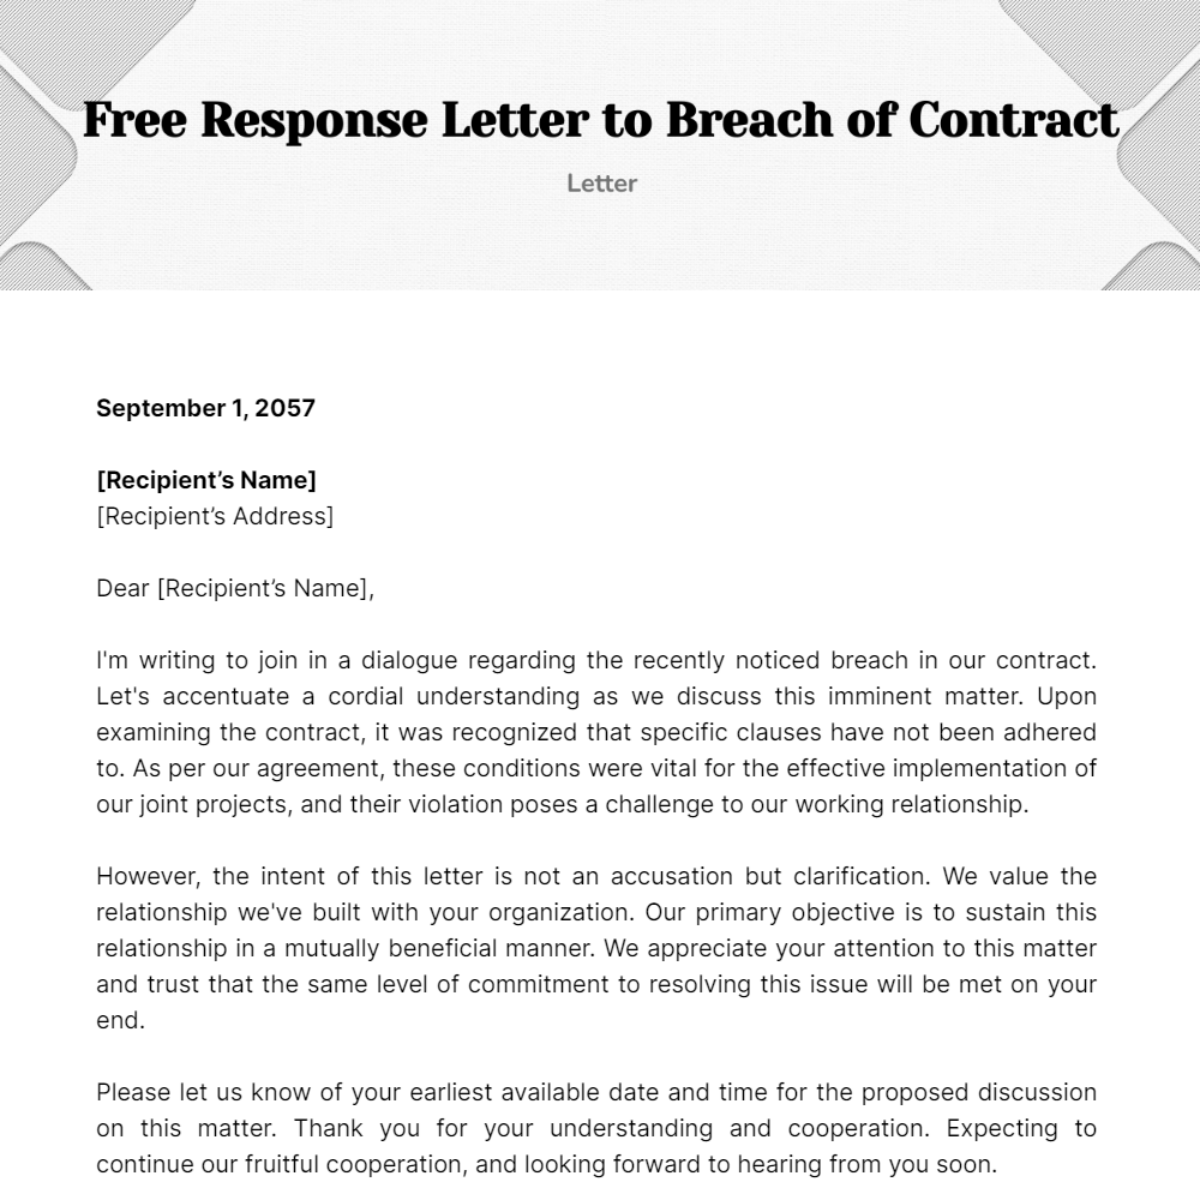 Free Response Letter to Breach of Contract